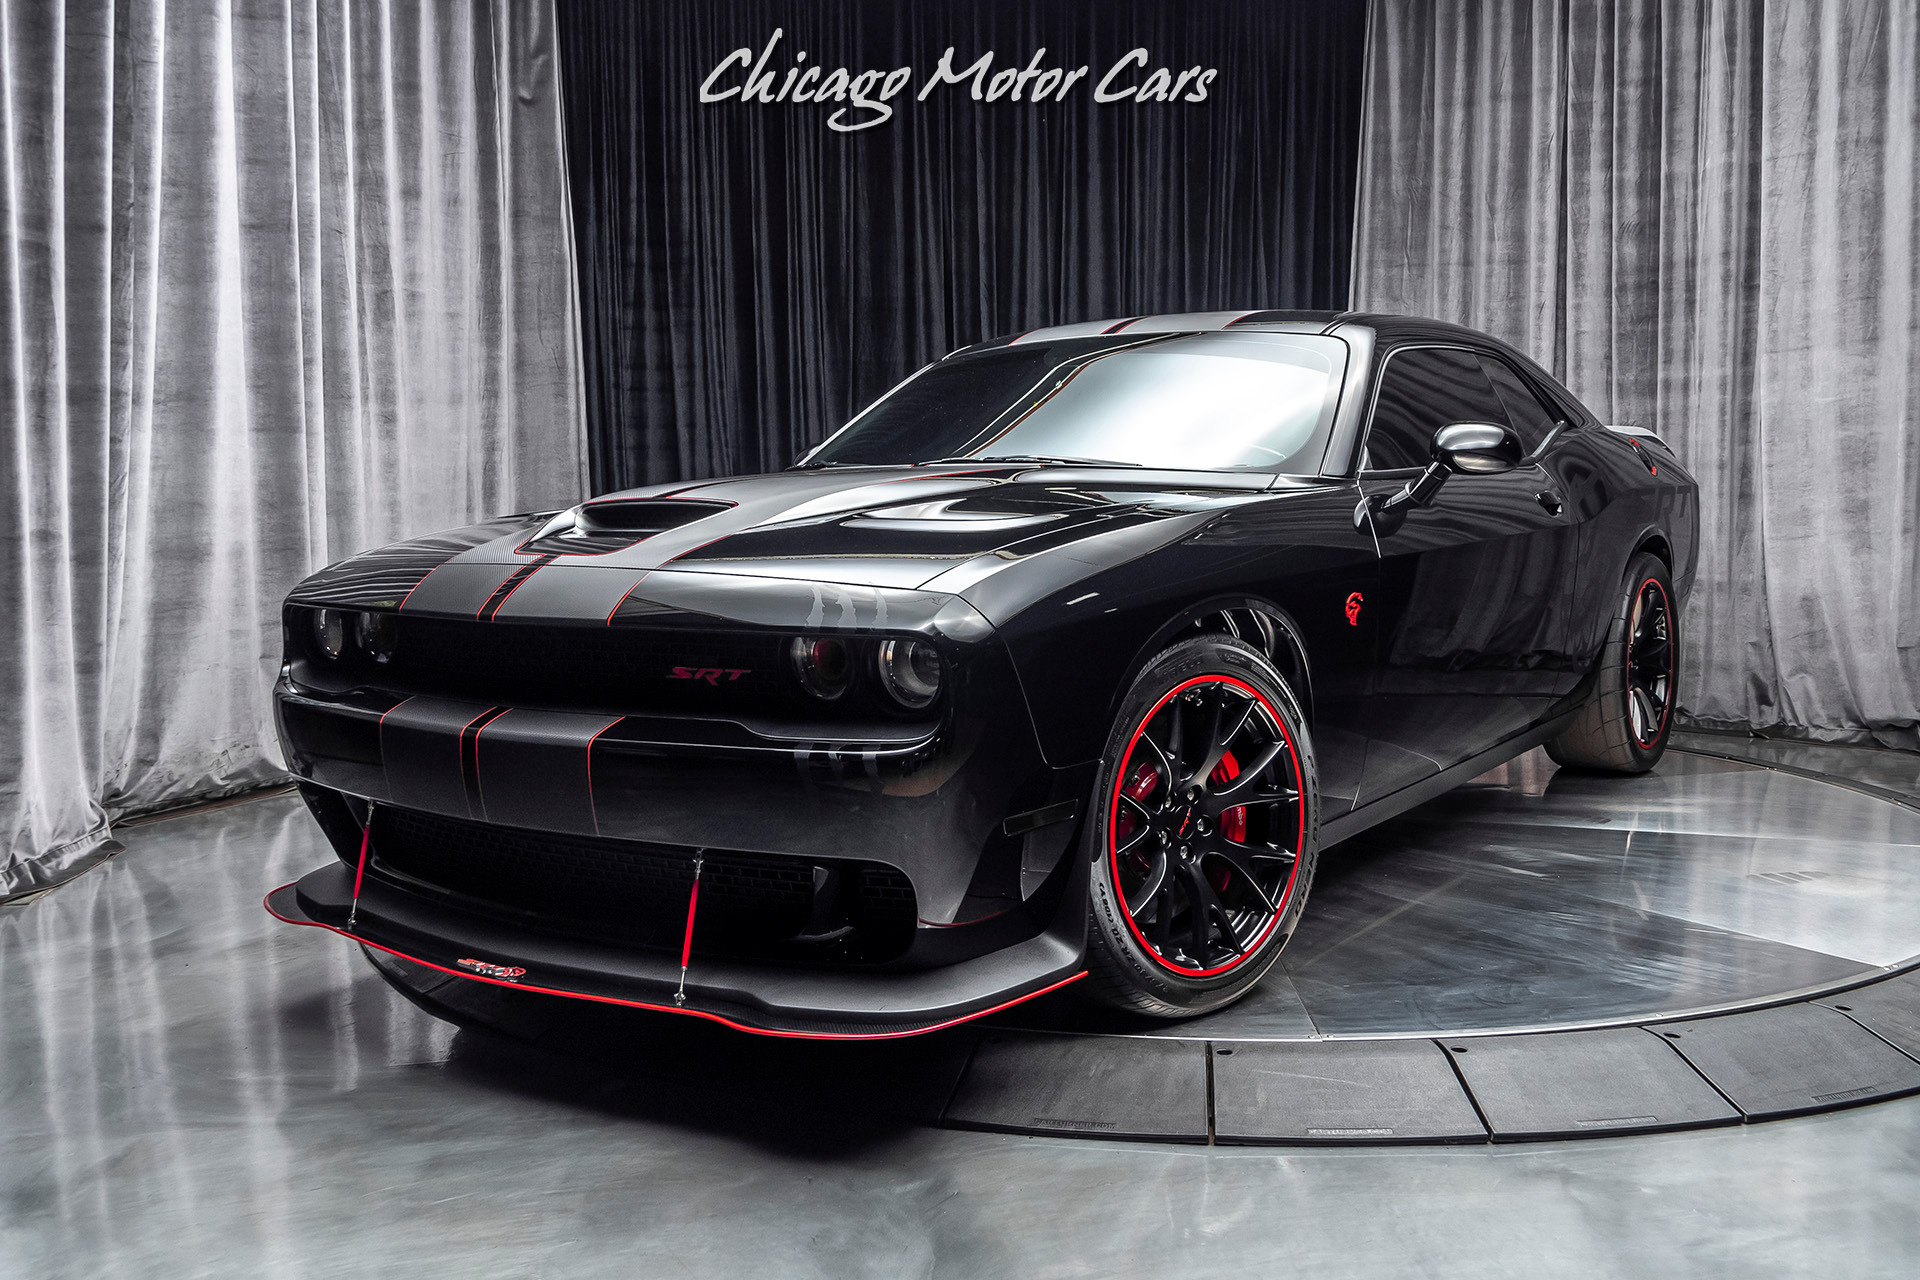 Used 2017 Dodge Challenger SRT Hellcat-OVER 1000 HP-Only 3K Miles! For Sale  (Special Pricing) | Chicago Motor Cars Stock #17247A